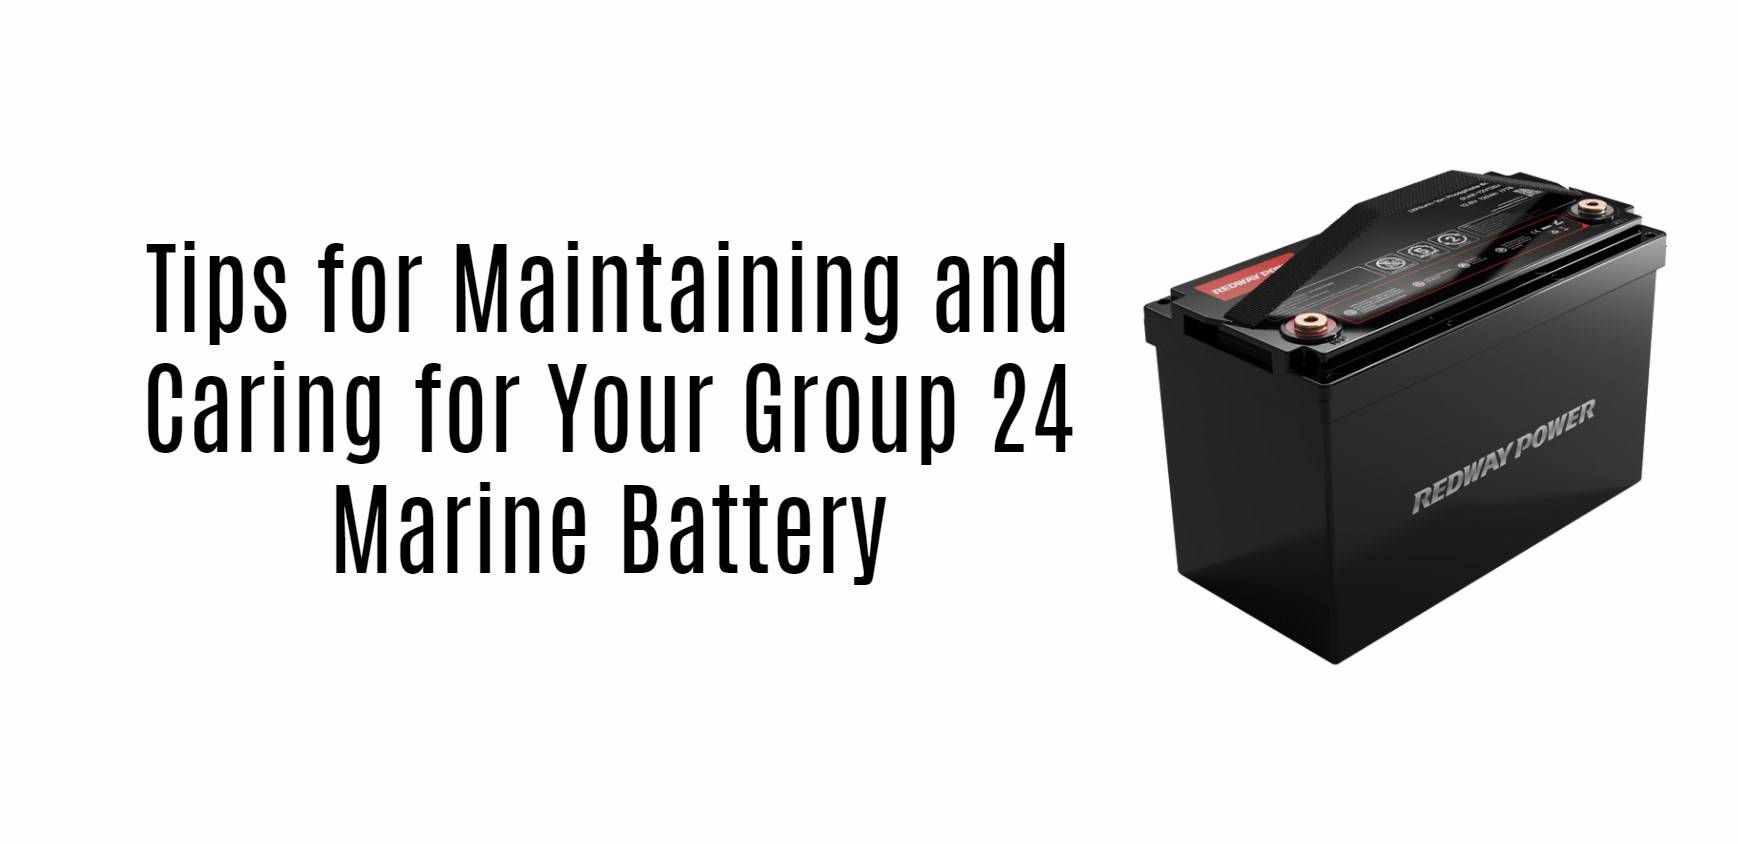 Tips for Maintaining and Caring for Your Group 24 Marine Battery. 12v 100ah lifepo4 catl